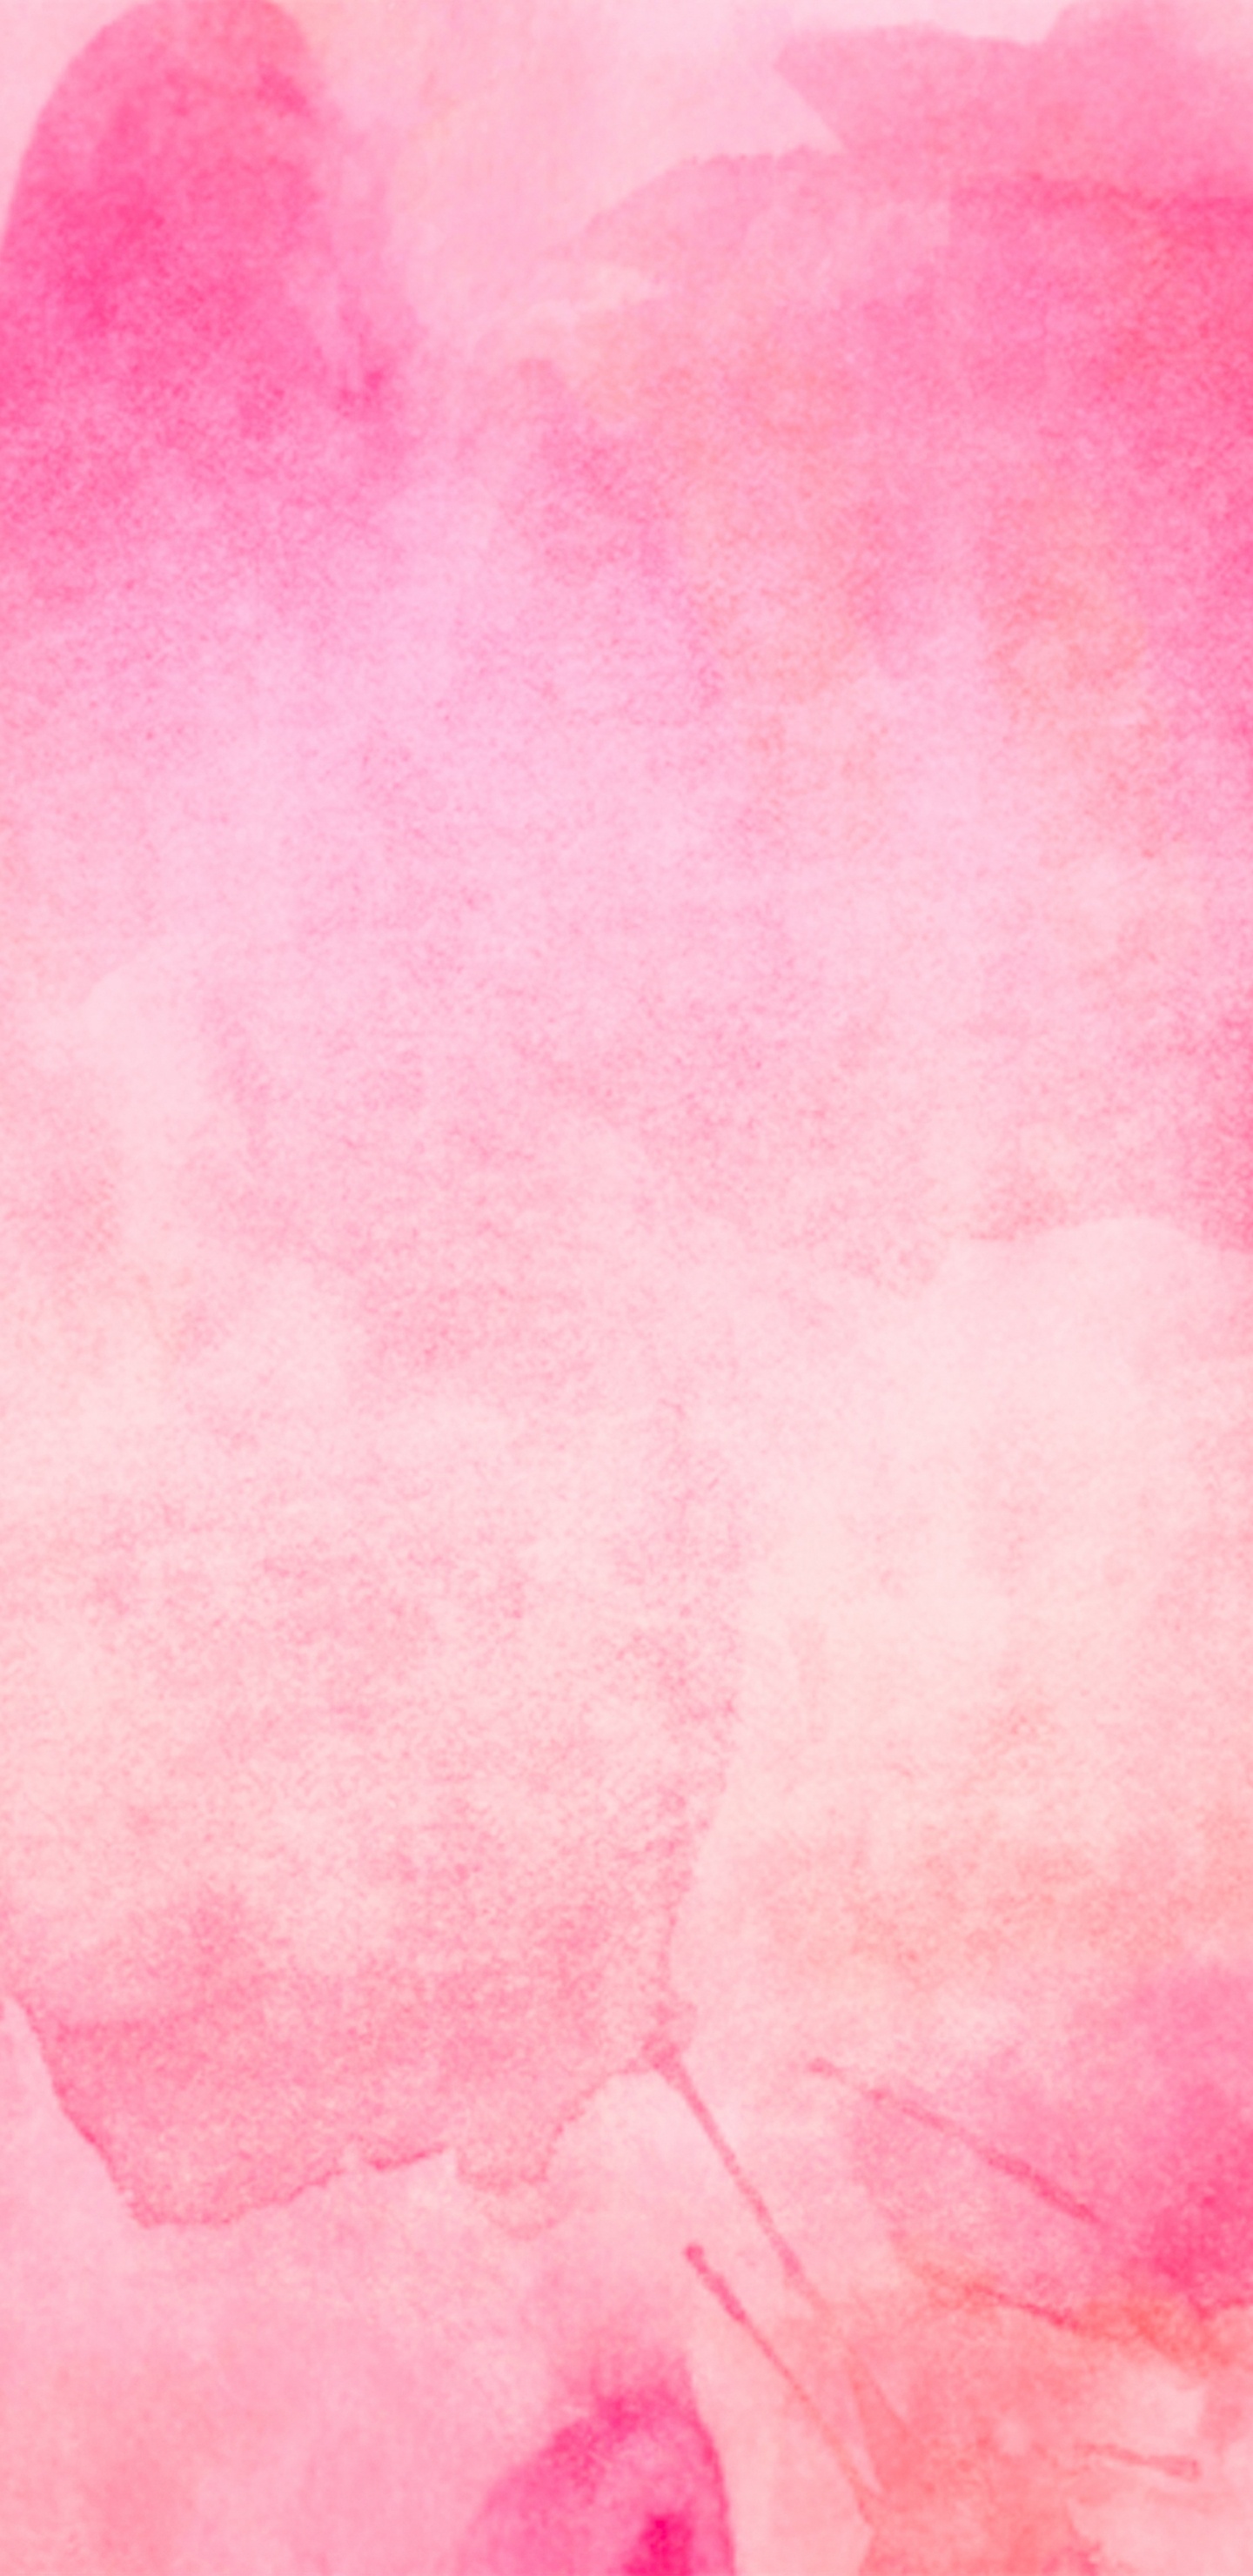 Pink and Blue Abstract Painting. Wallpaper in 1440x2960 Resolution